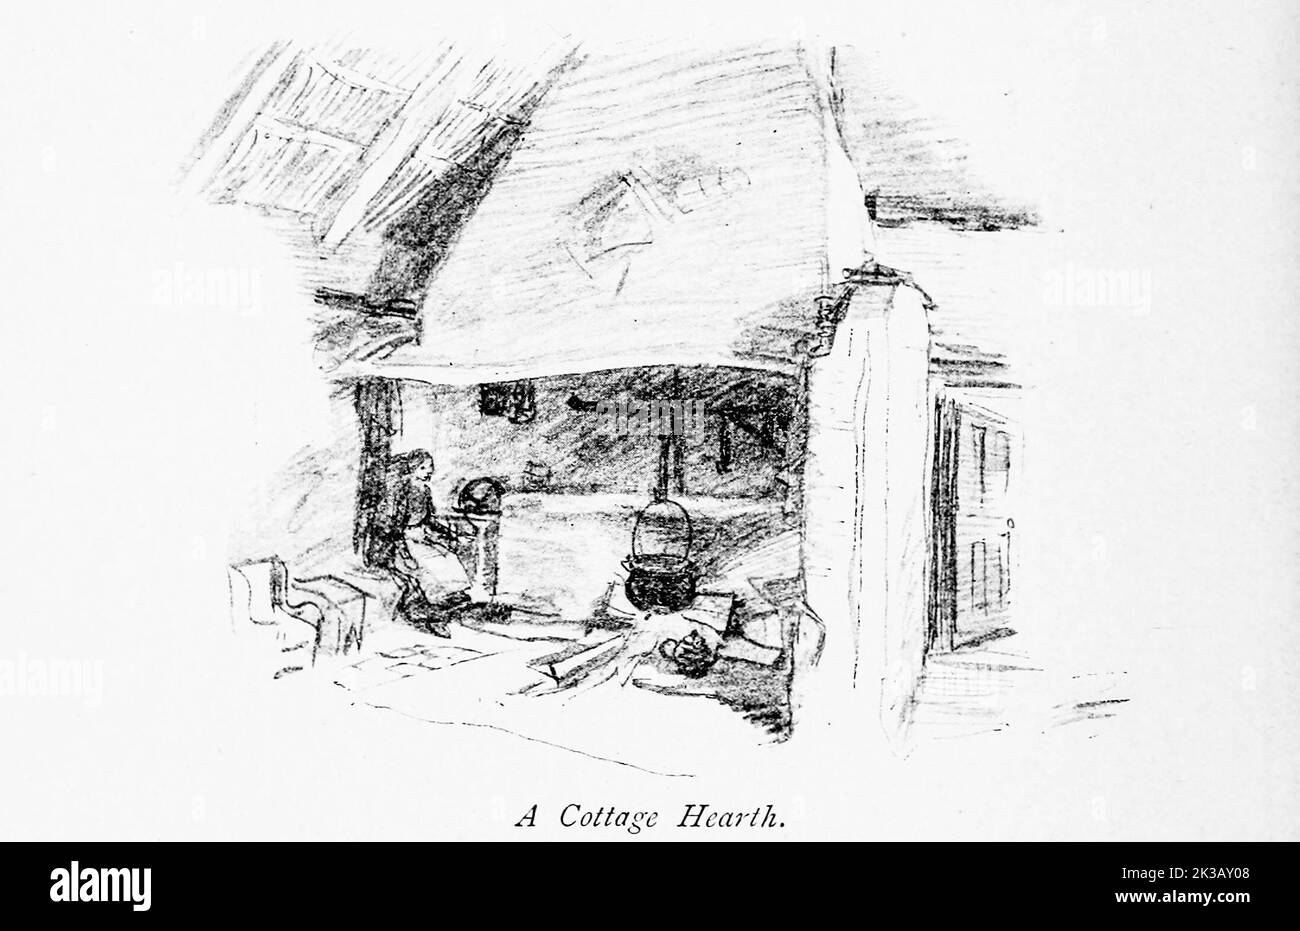 A Cottage Hearth illustrated by Hugh Thomson from the book ' The famous cities of Ireland ' by Gwynn, Stephen Lucius, Publisher: Publisher: Dublin, Maunsel & Co., ; New York, The Macmillan Co 1915 Stock Photo